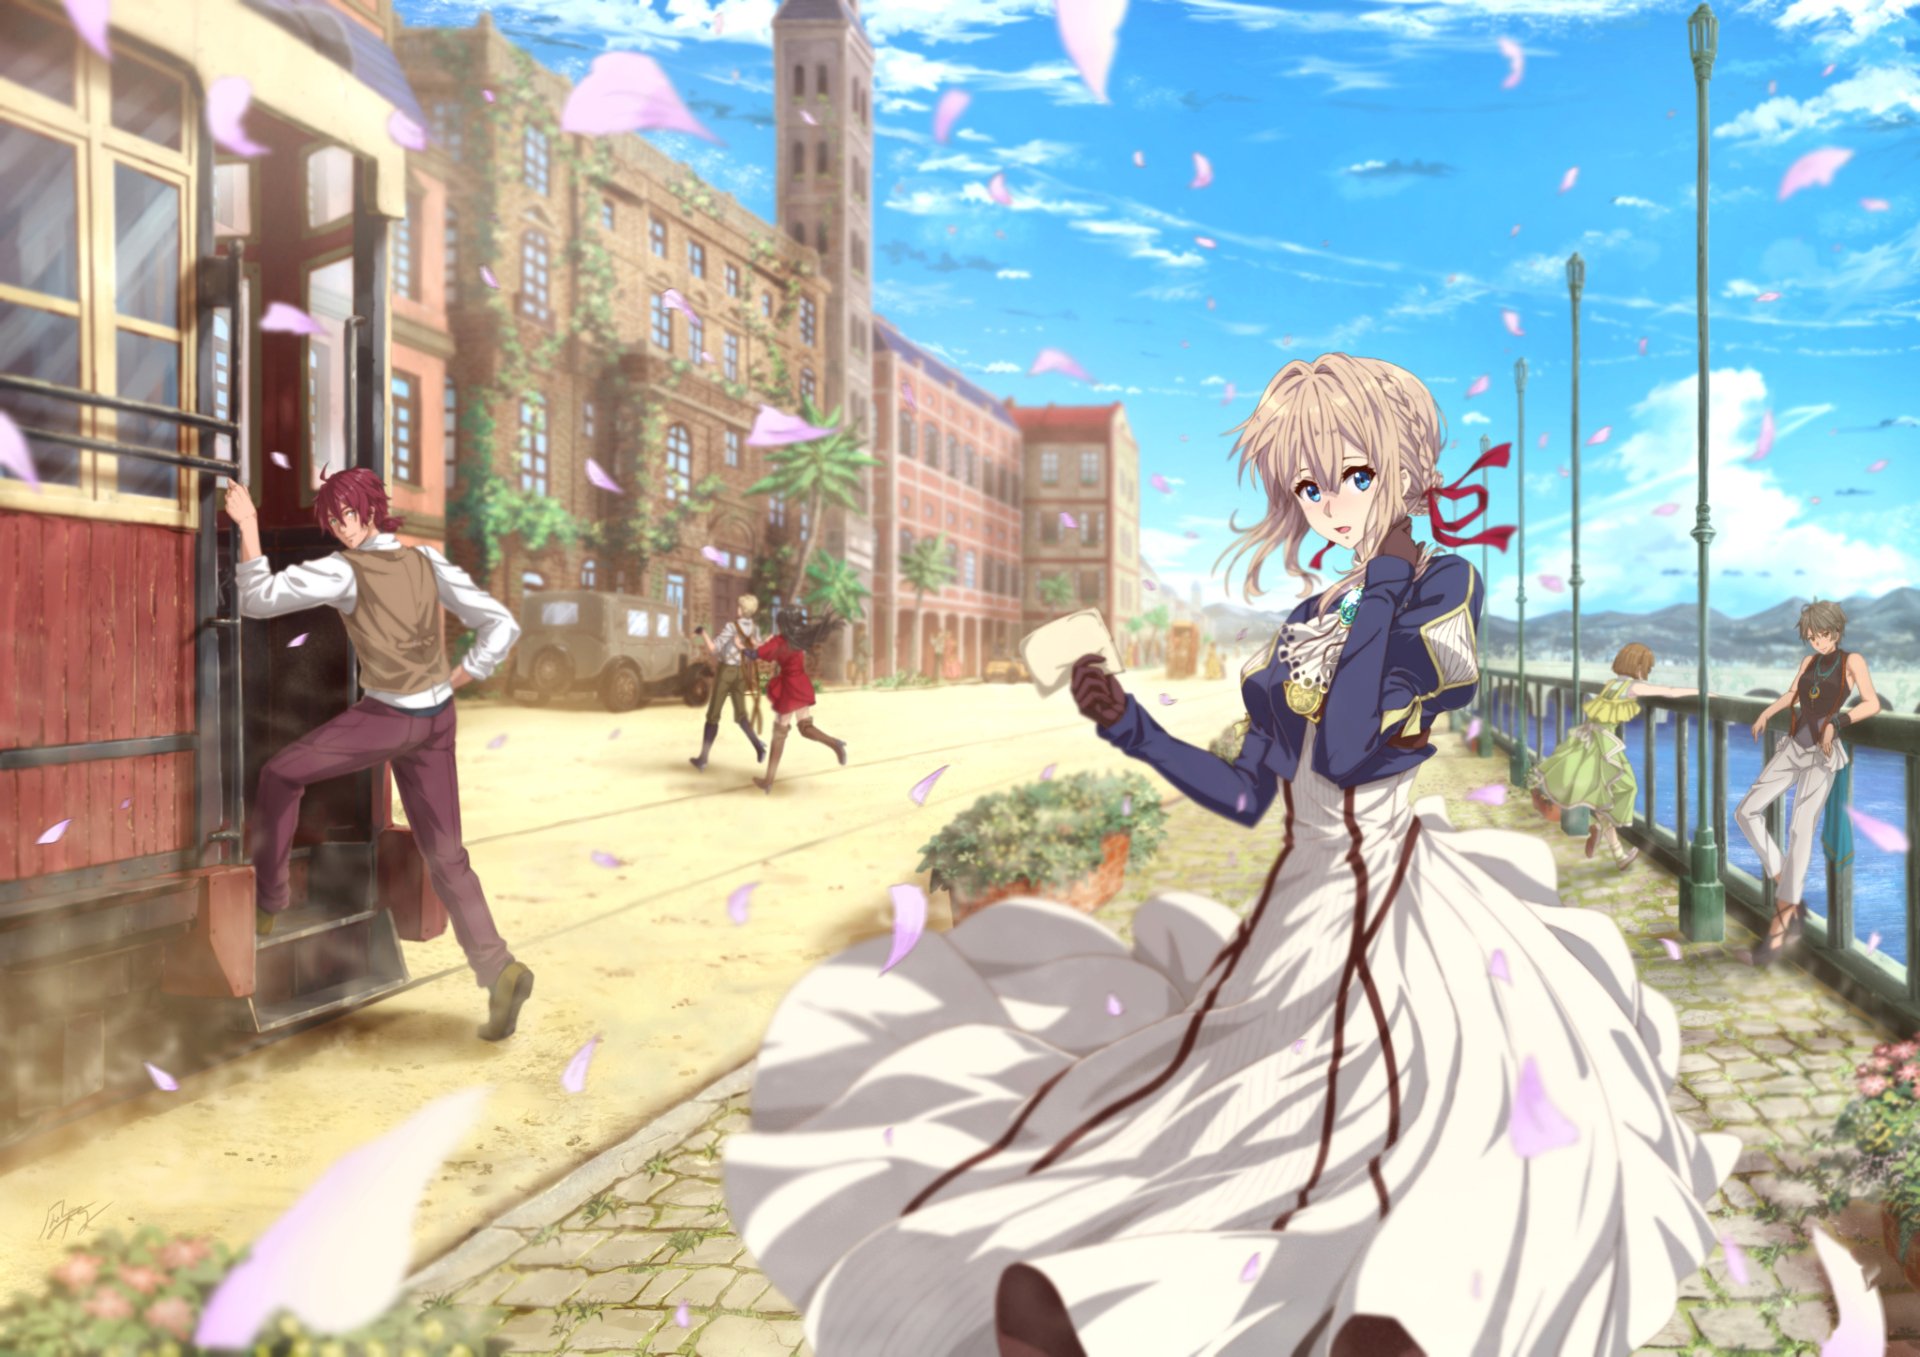 Violet Evergarden in a beautiful HD anime desktop wallpaper and background.